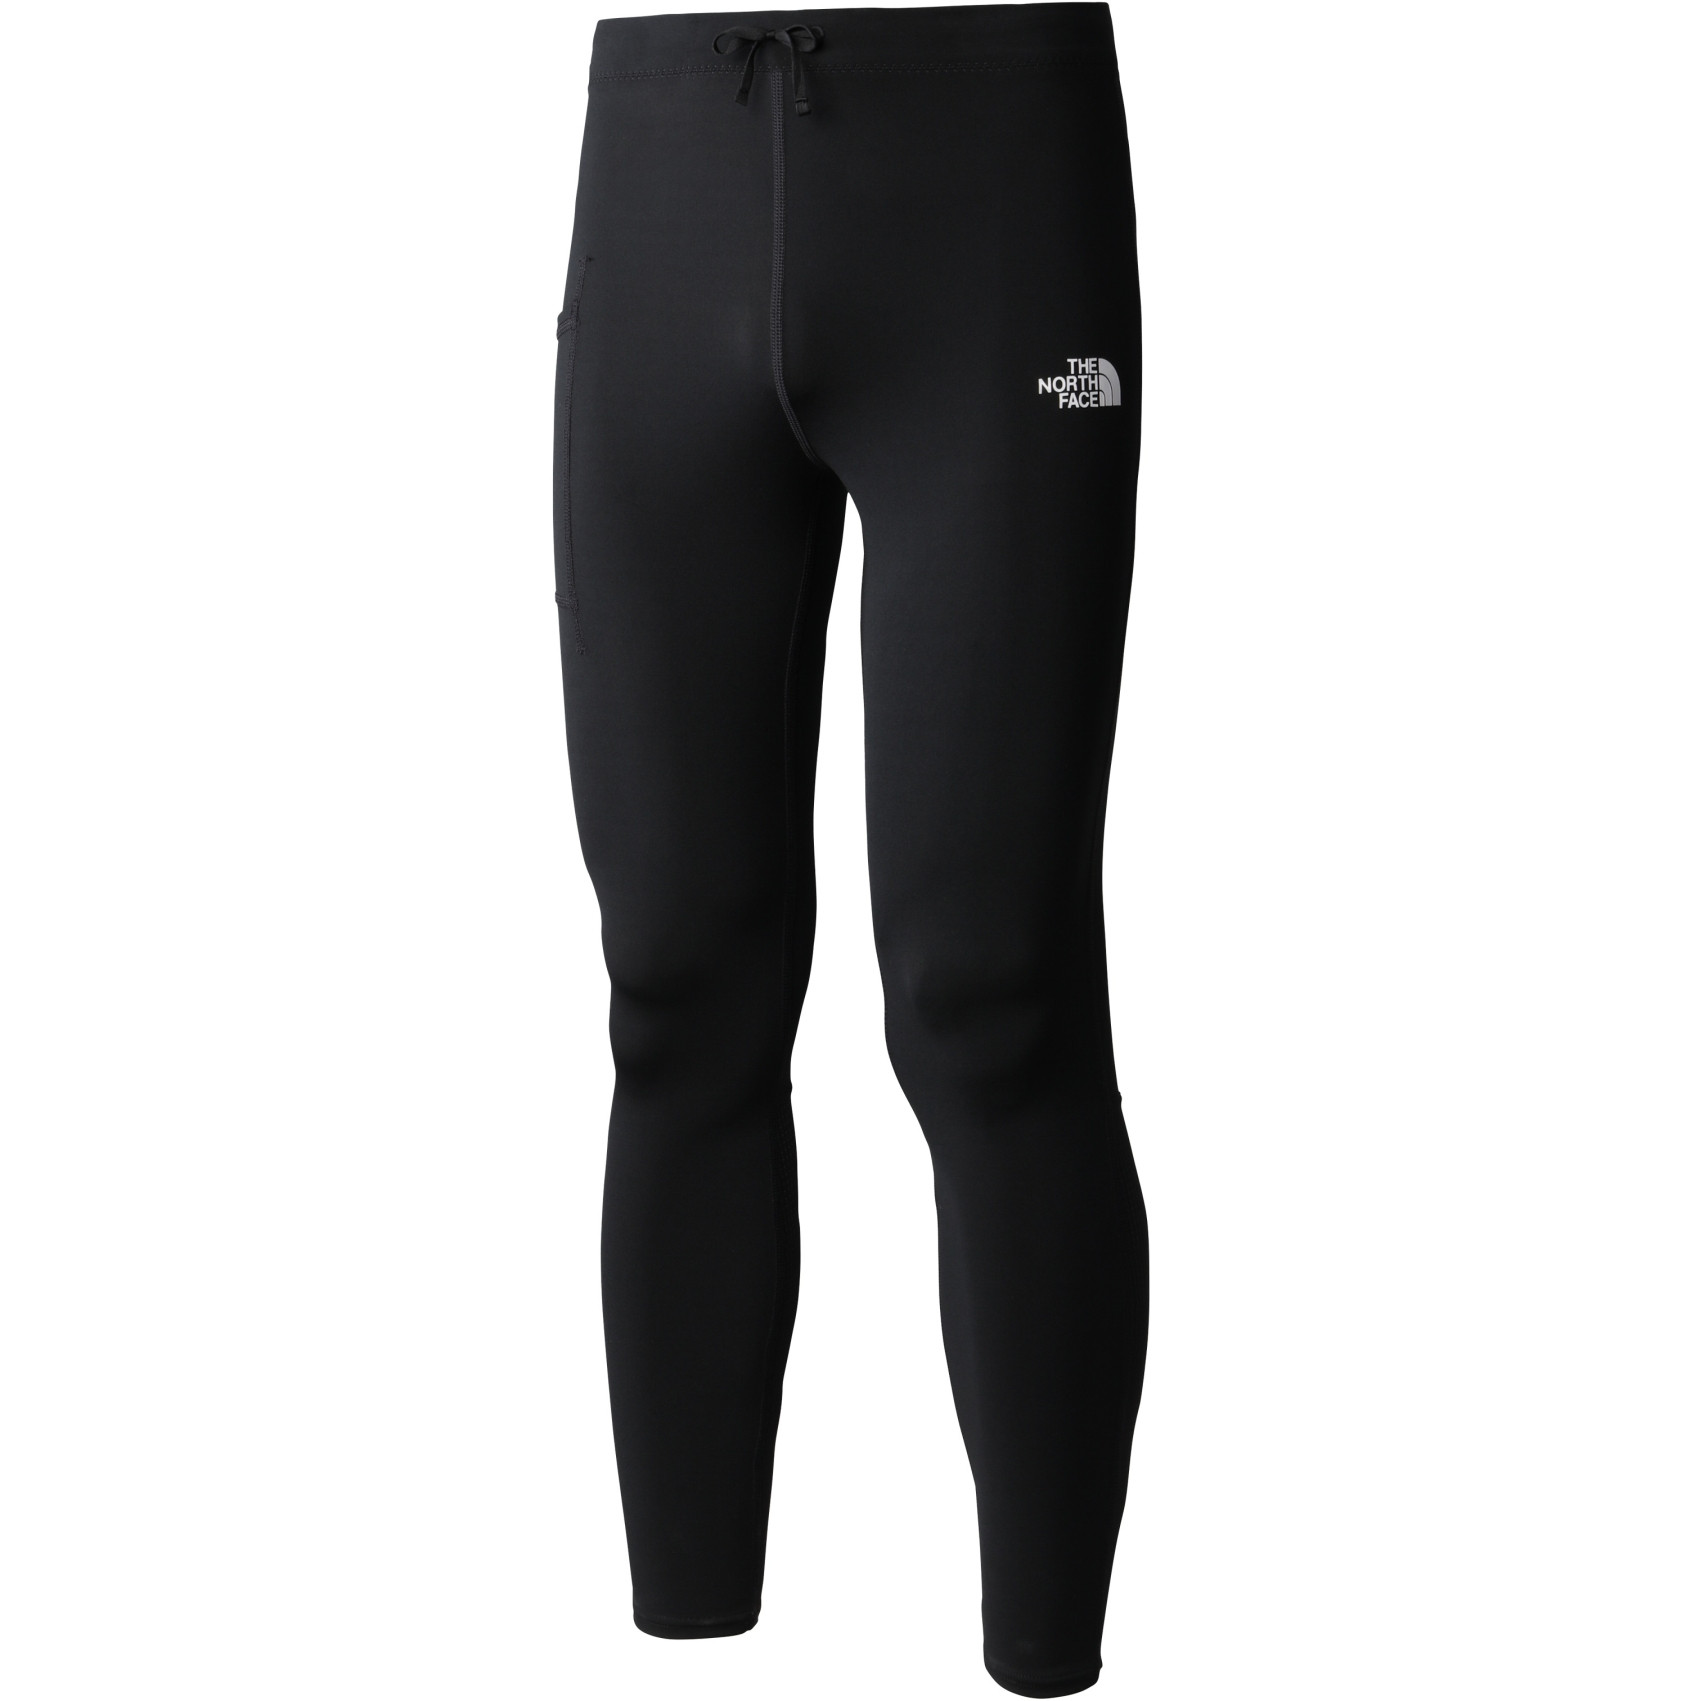 Productfoto van The North Face Movmynt Tight Heren - TNF Black